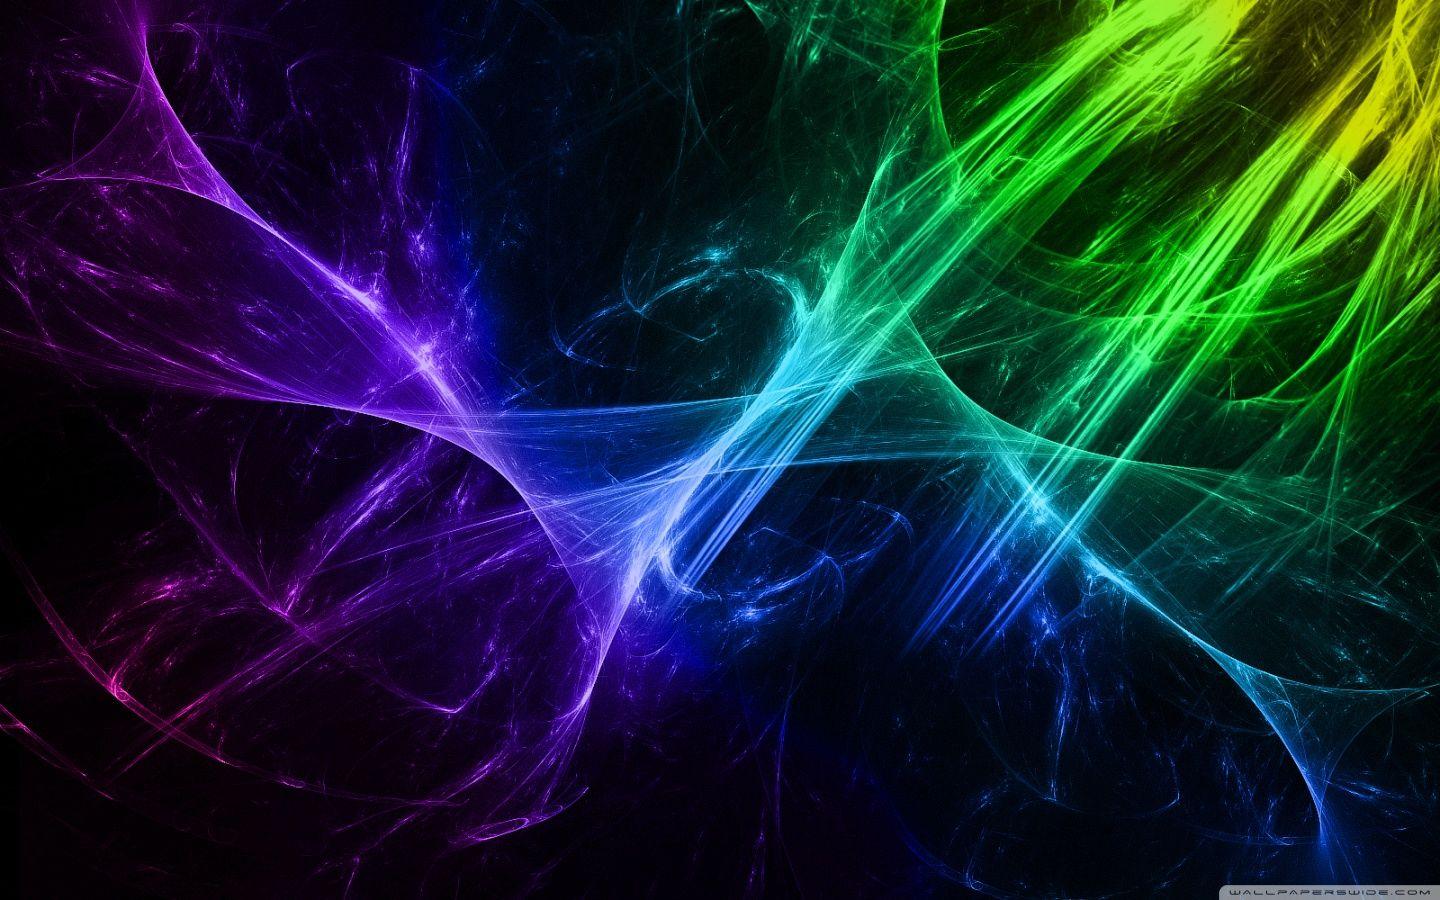 NoLogo Abstract Glow Wallpaper by xeVile on DeviantArt